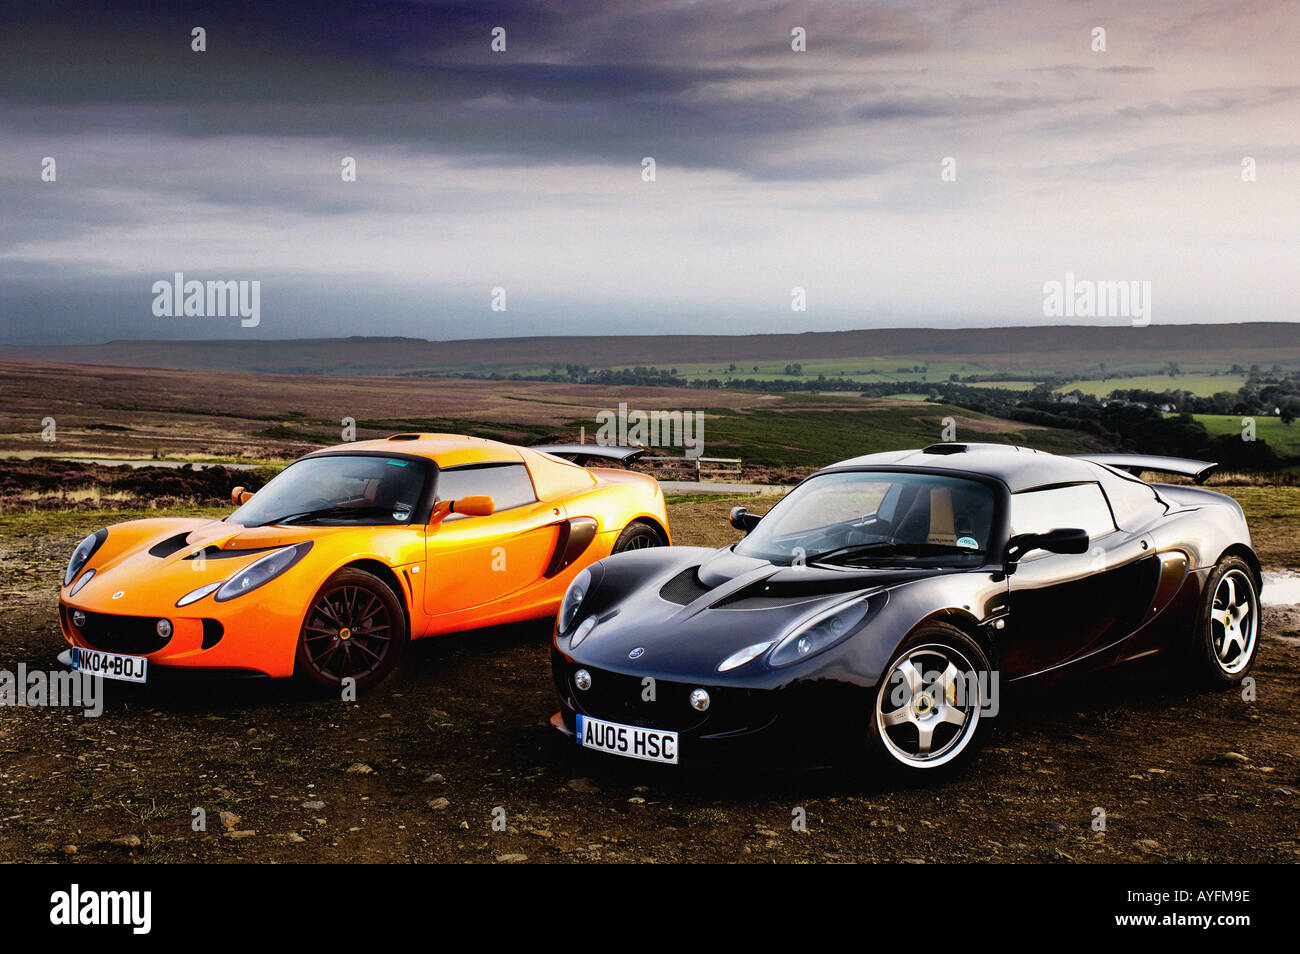 Two Lotus Exige cars, one orange and one black parked side by side with the dramatic scenery of the North Yorkshire Moors in the distance. Stock Photo